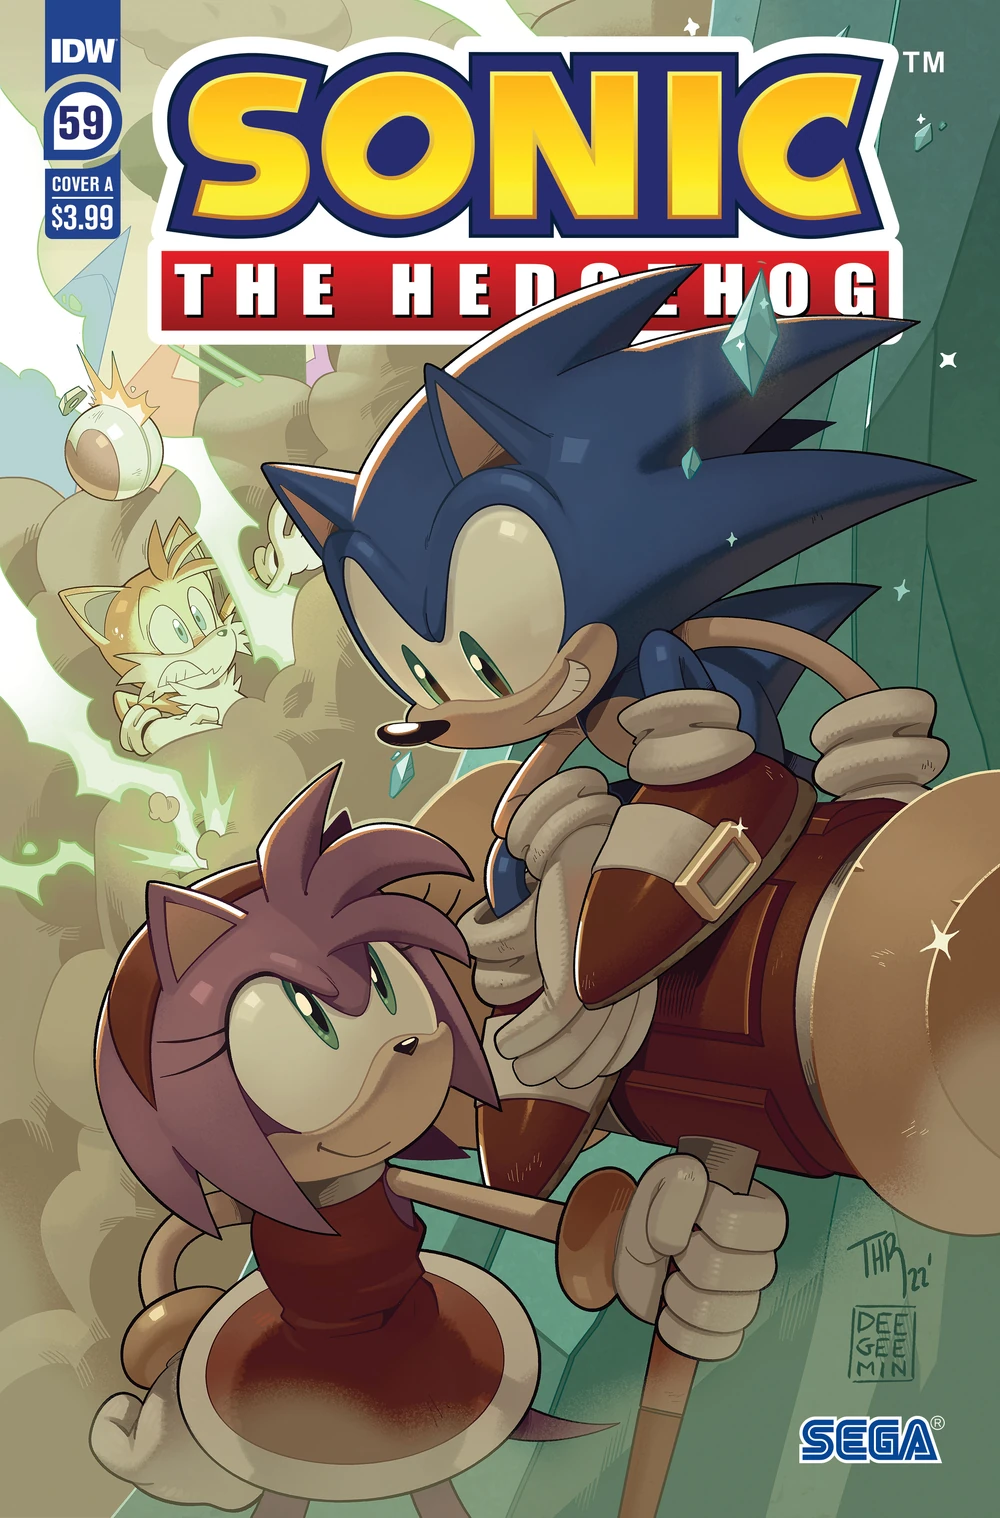 Sonic The Hedgehog #59 Cover A